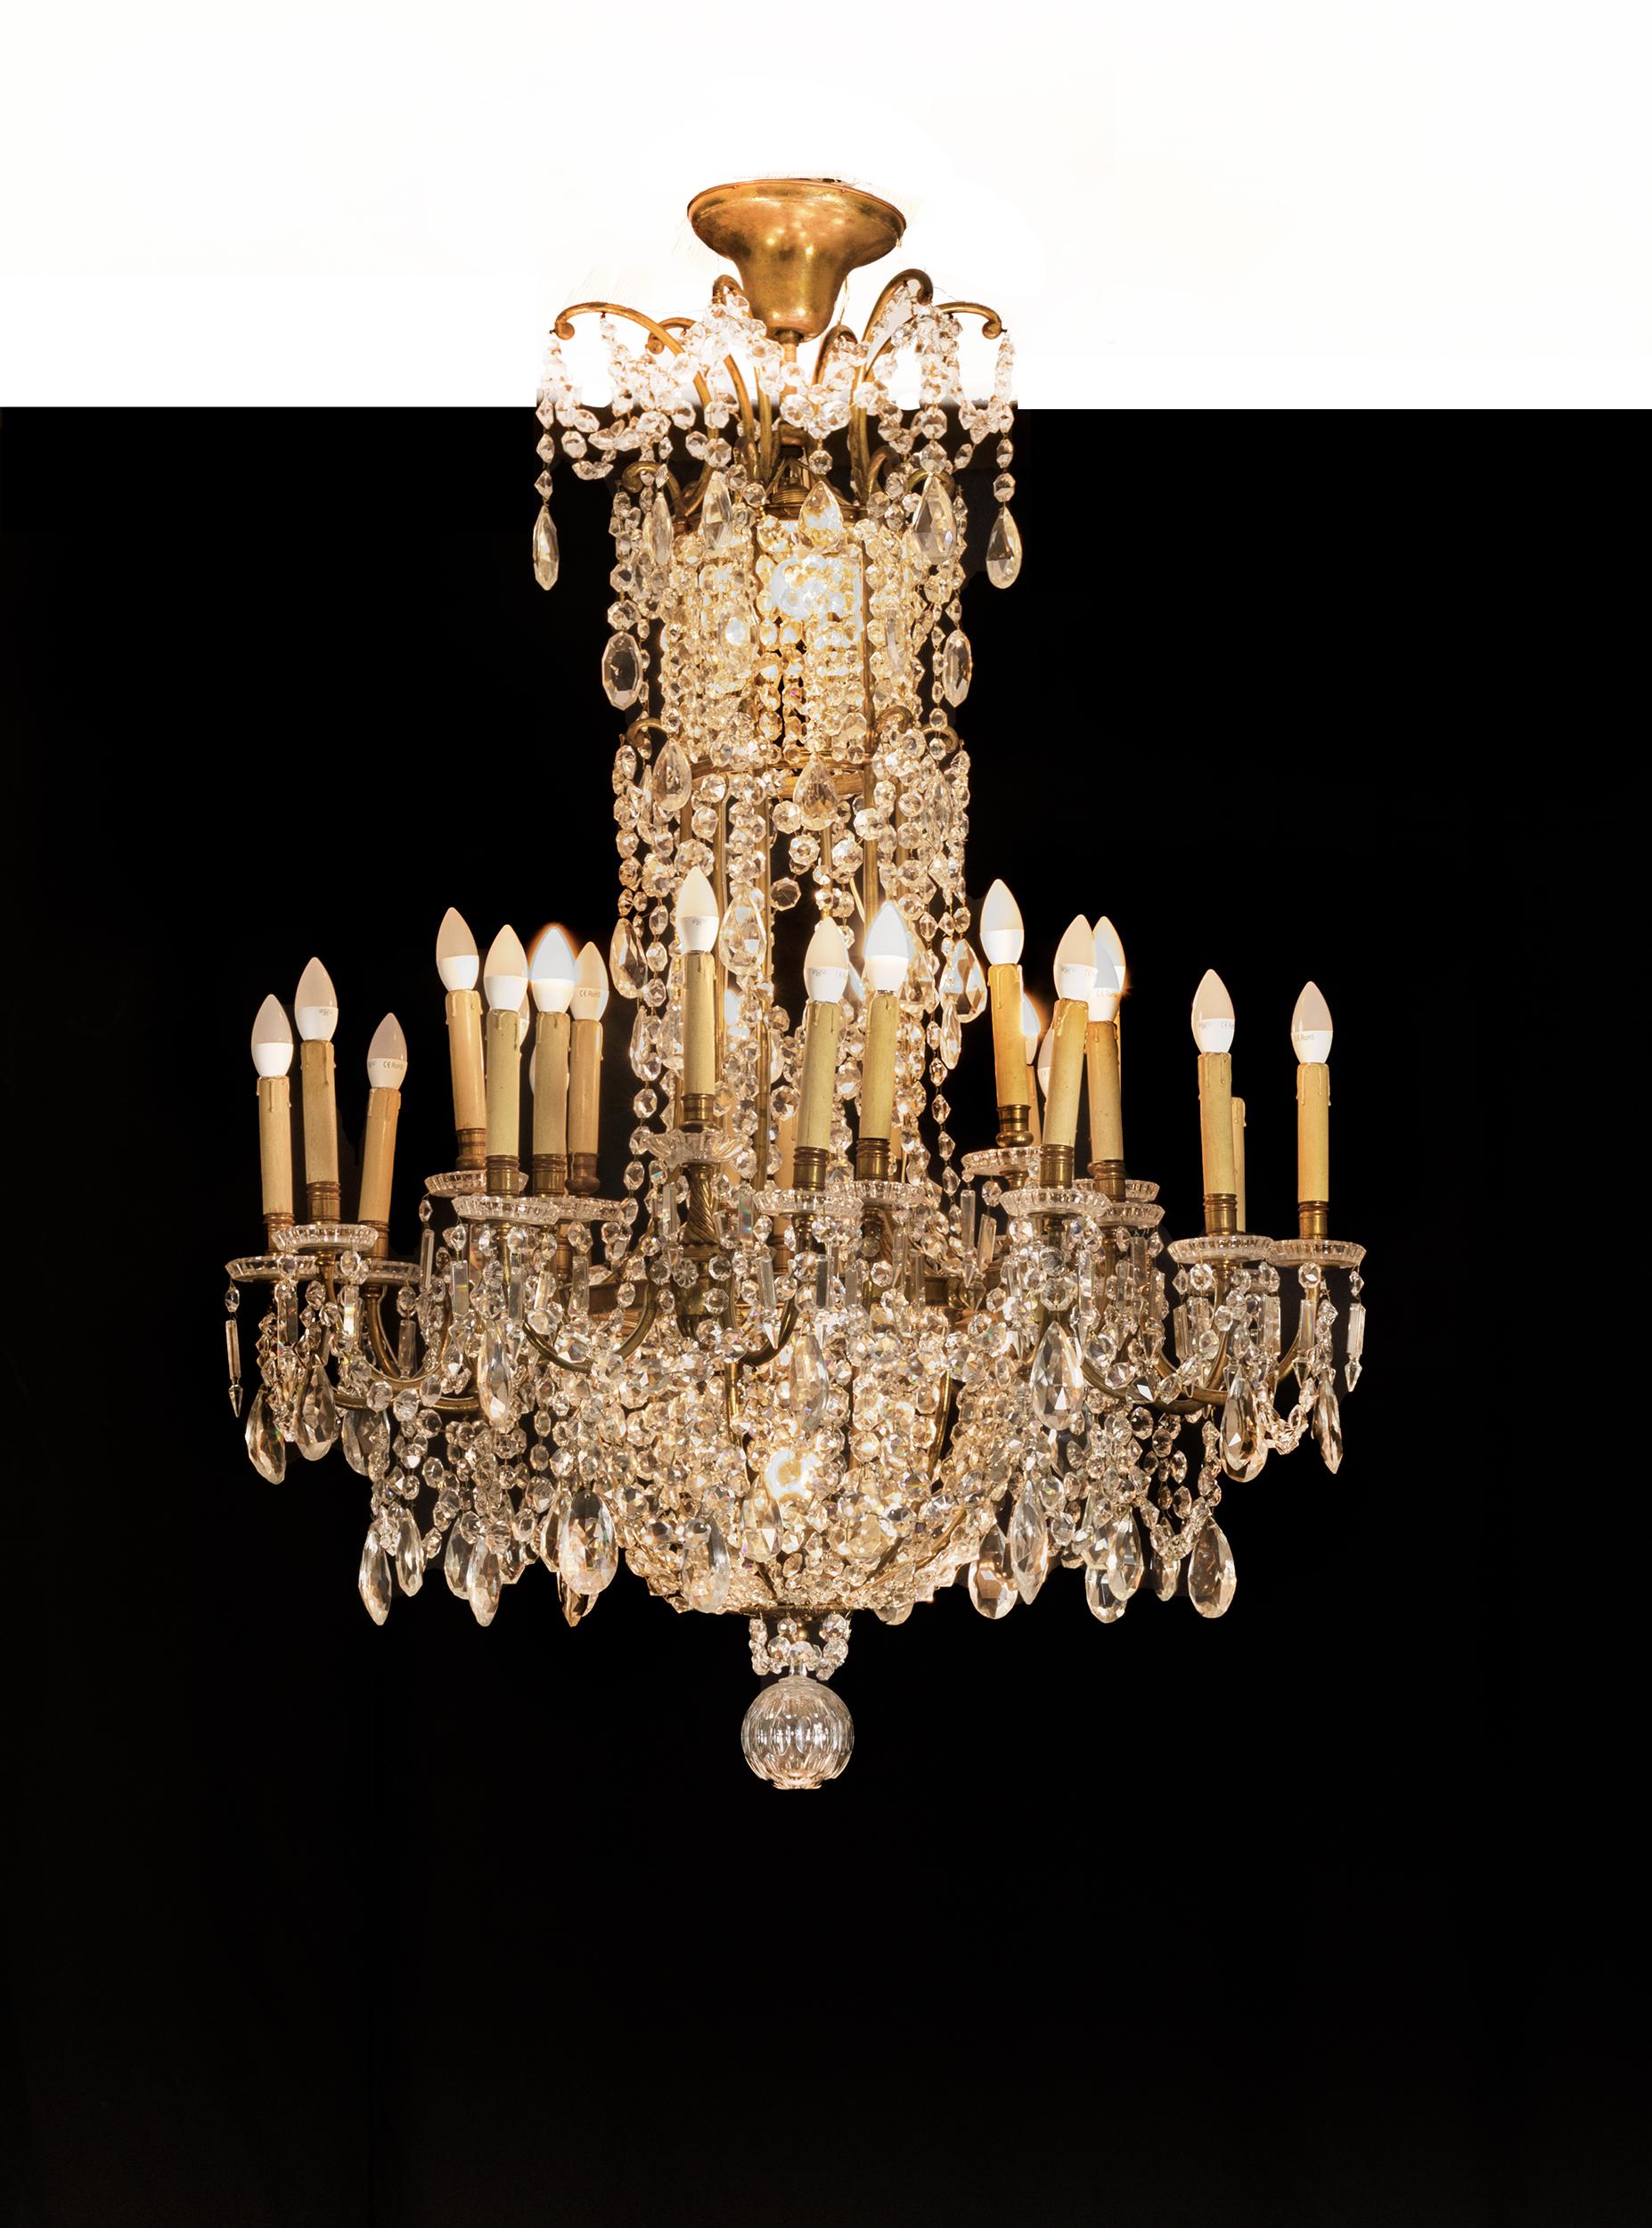 This Baccarat crystal and doré bronze chandelier of monumental size and opulent design is truly a splendid sight boasting 24 lights, distinguished by the oversized drops of crystals, which hang among garlands of luminous prisms from the doré bronze